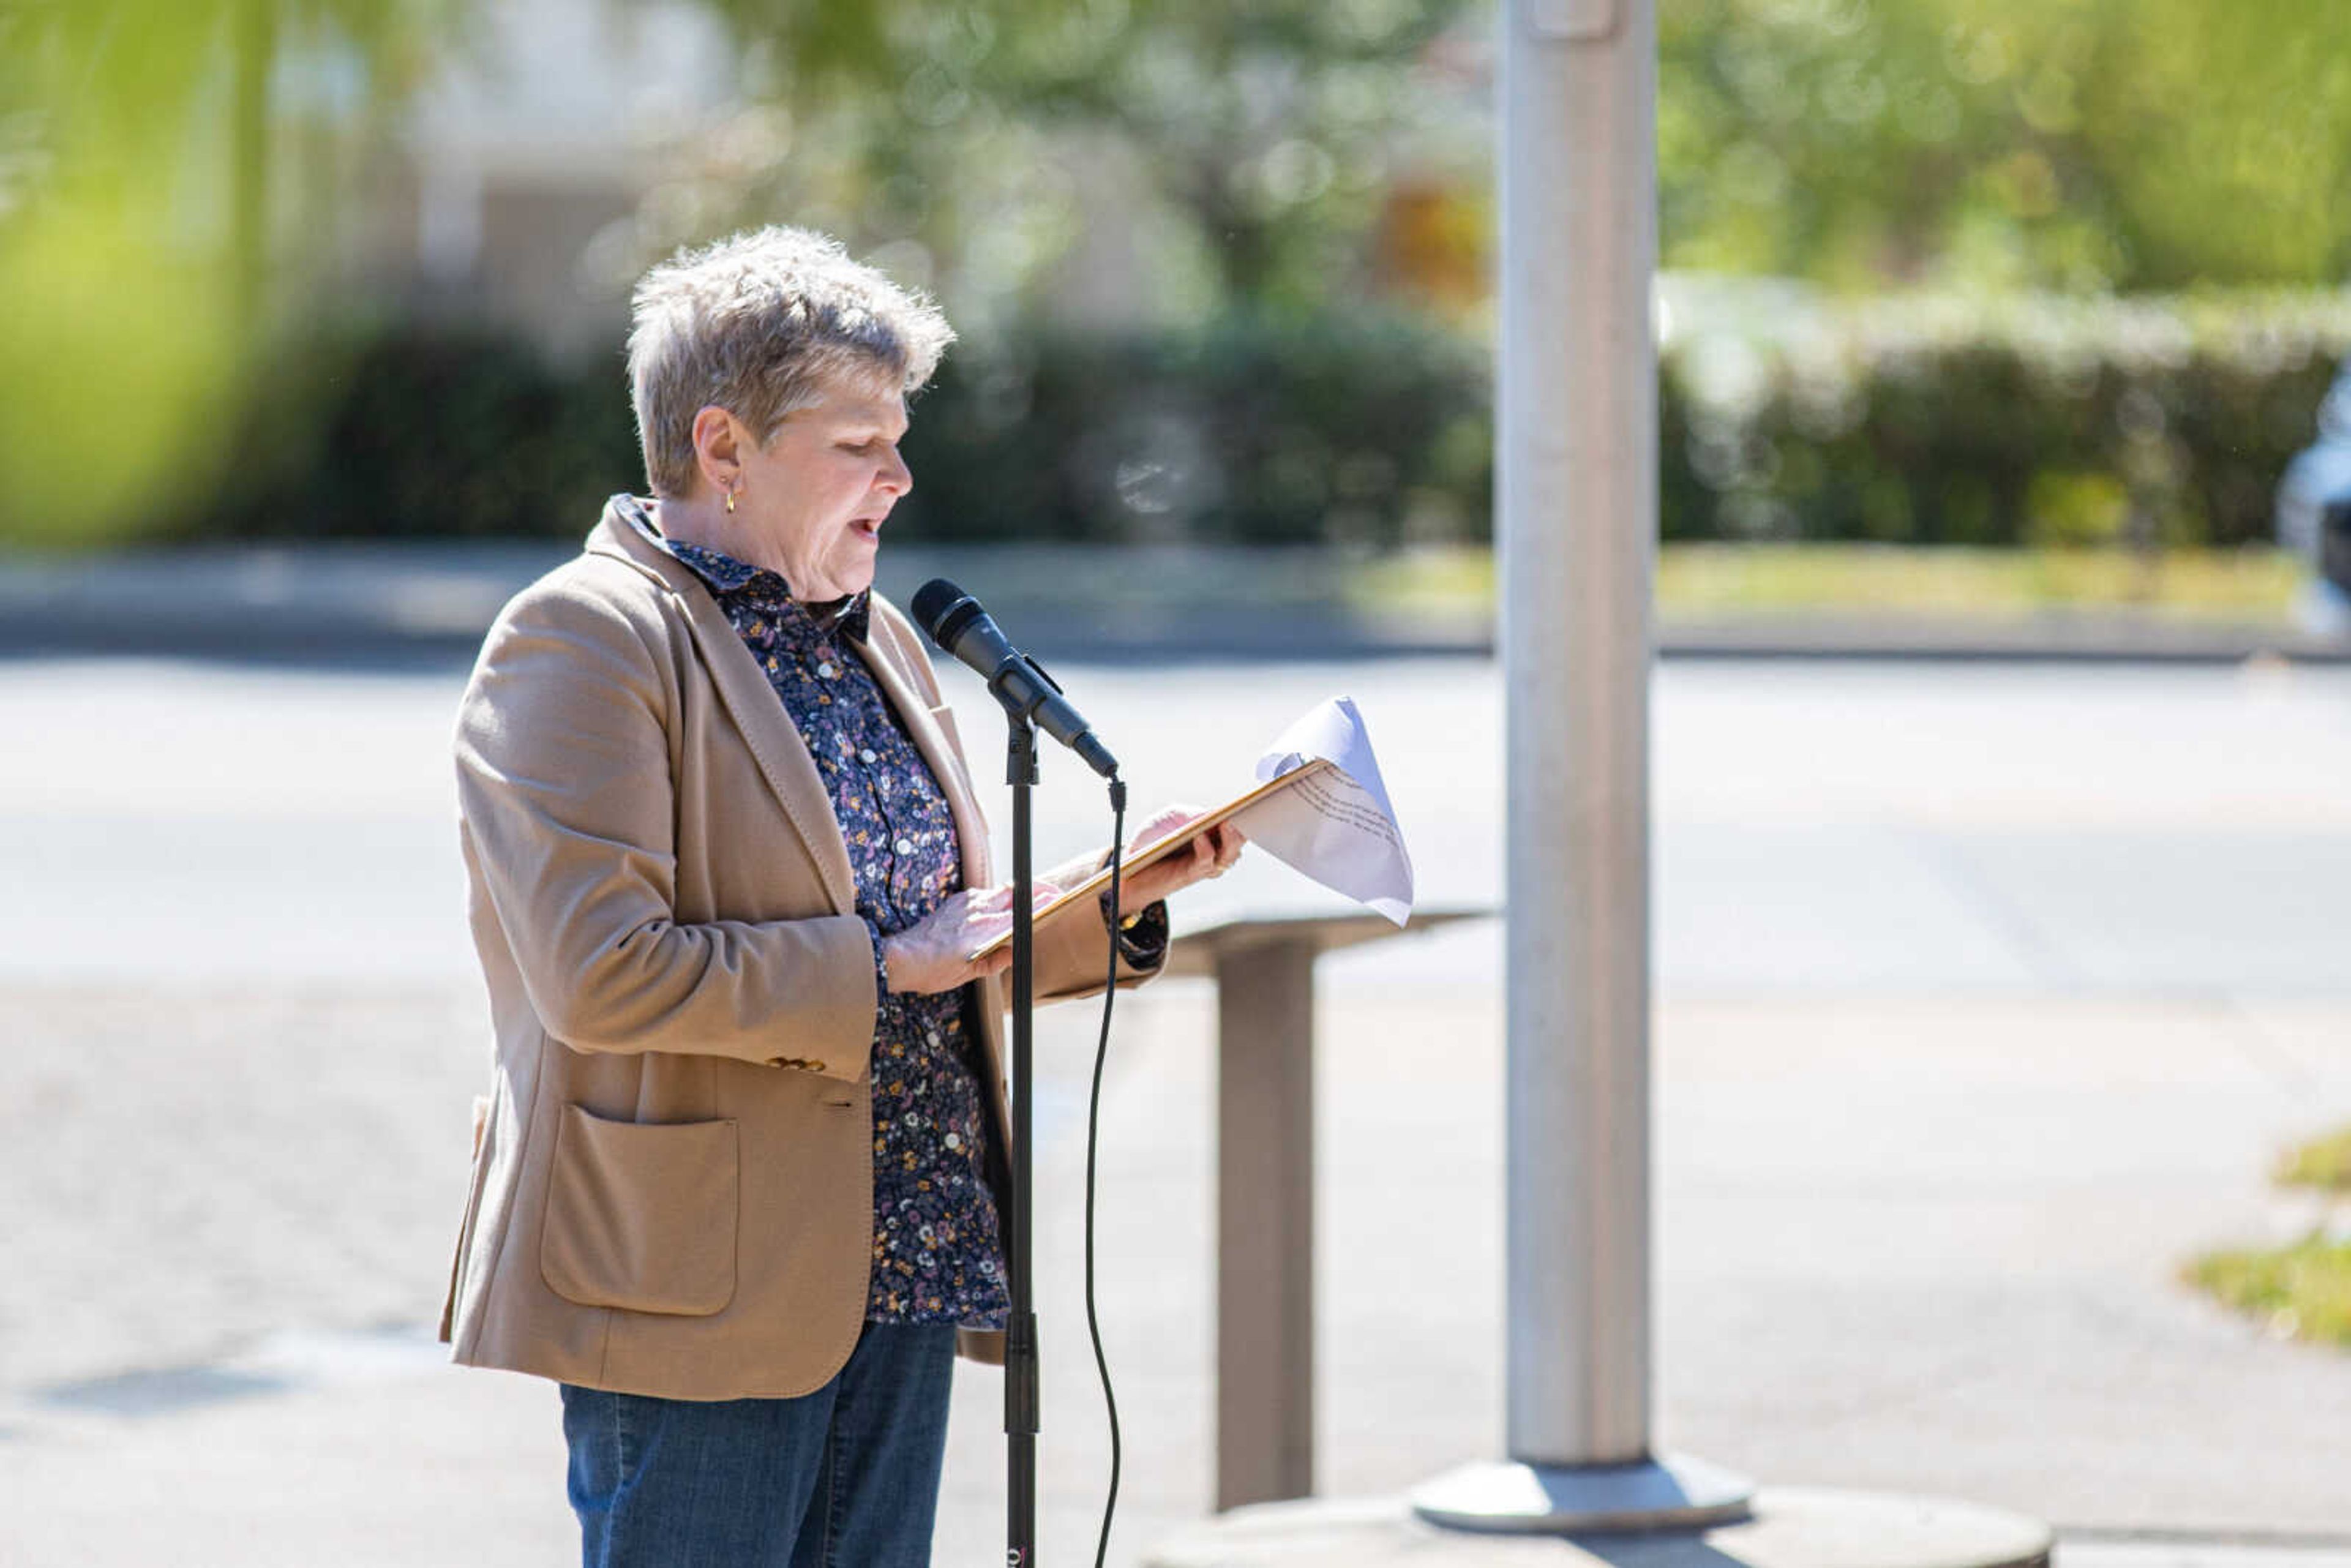 Missouri Congressional Candidate, Kathy Ellis speaks during a women's rights march in Cape Girardeau, Missouri. October 17, 2020.